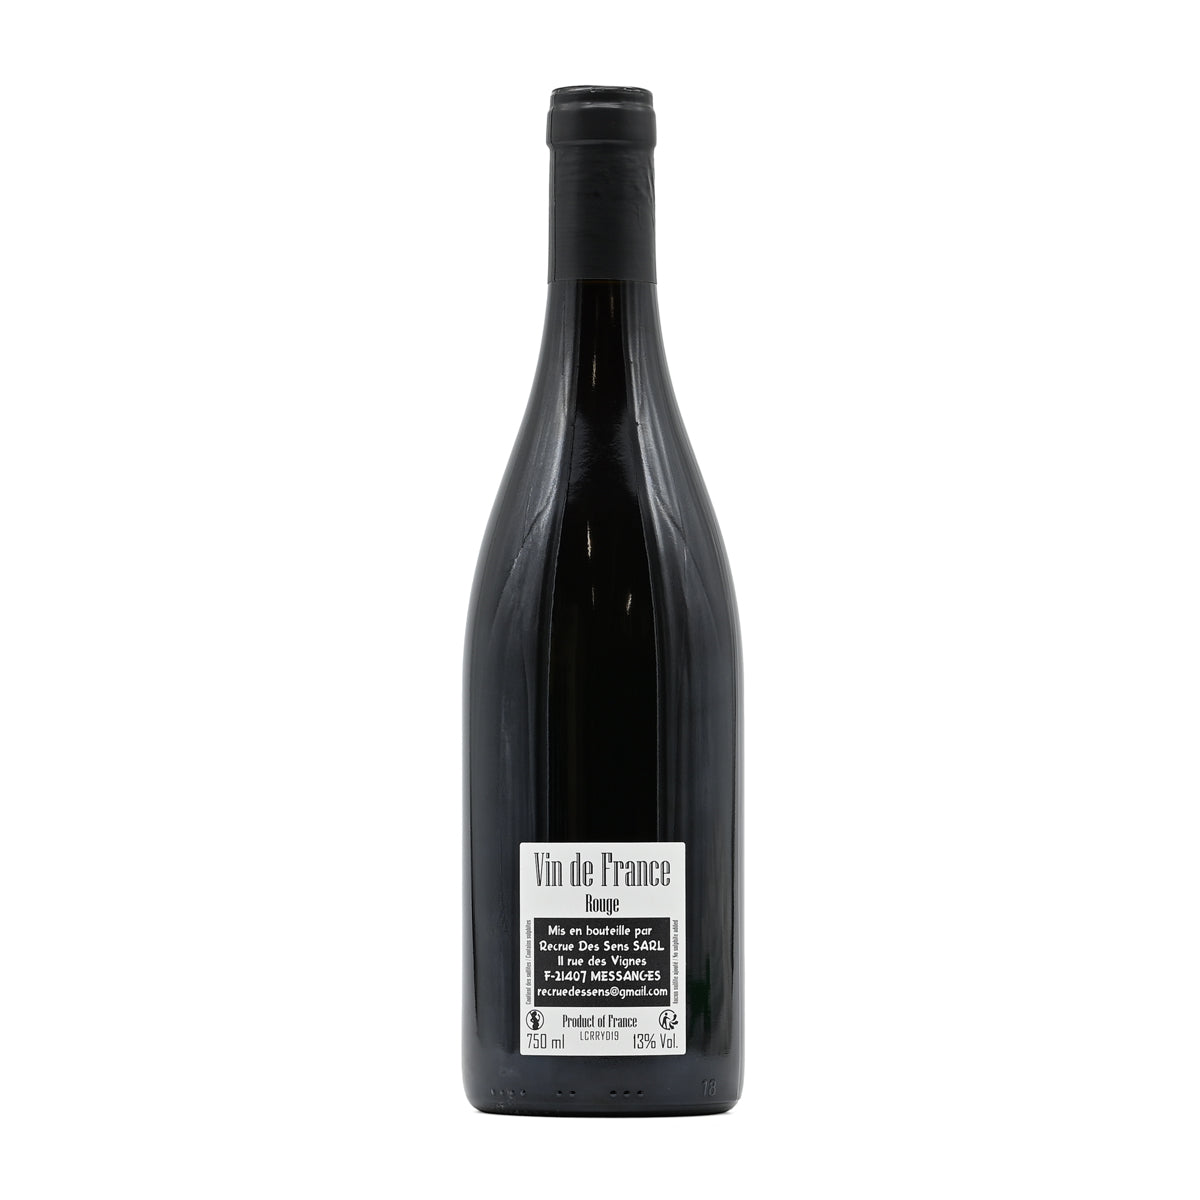 Yann Durieux CR Rouge 2019, 750ml French red wine, made from Pinot Noir; Vin de France, from Burgundy, France – GDV Fine Wines, Hong Kong